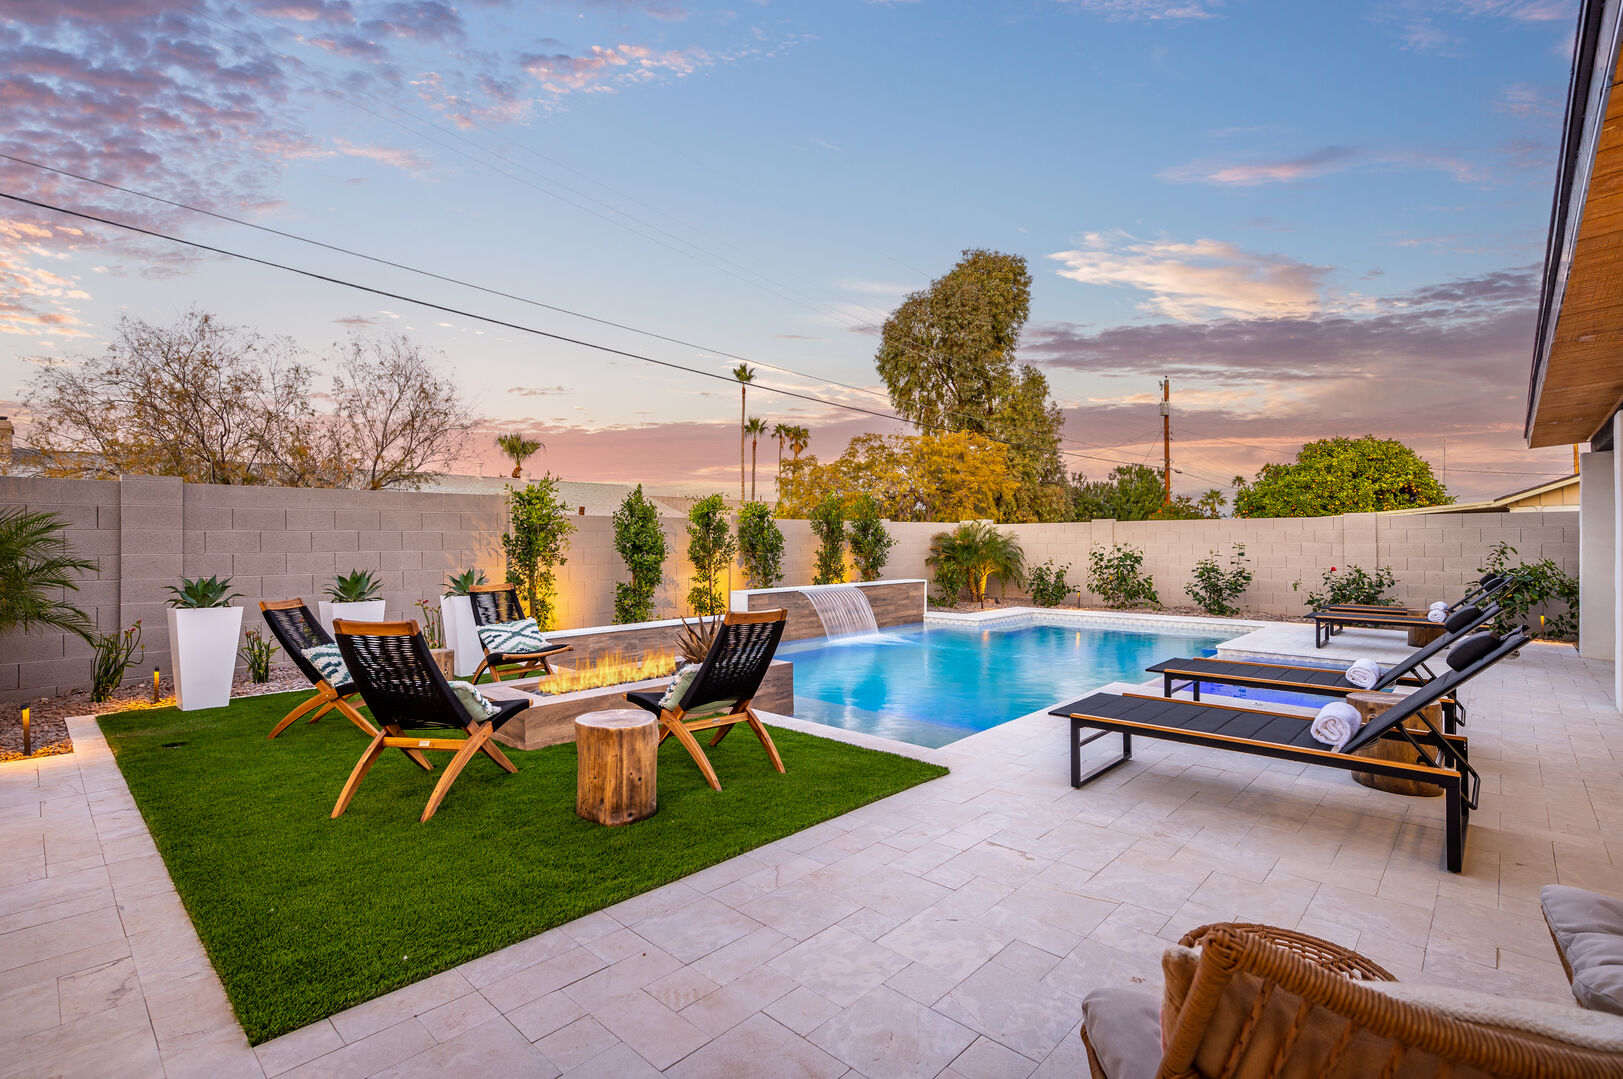 Gather around the fire pit or lounge by the pool.